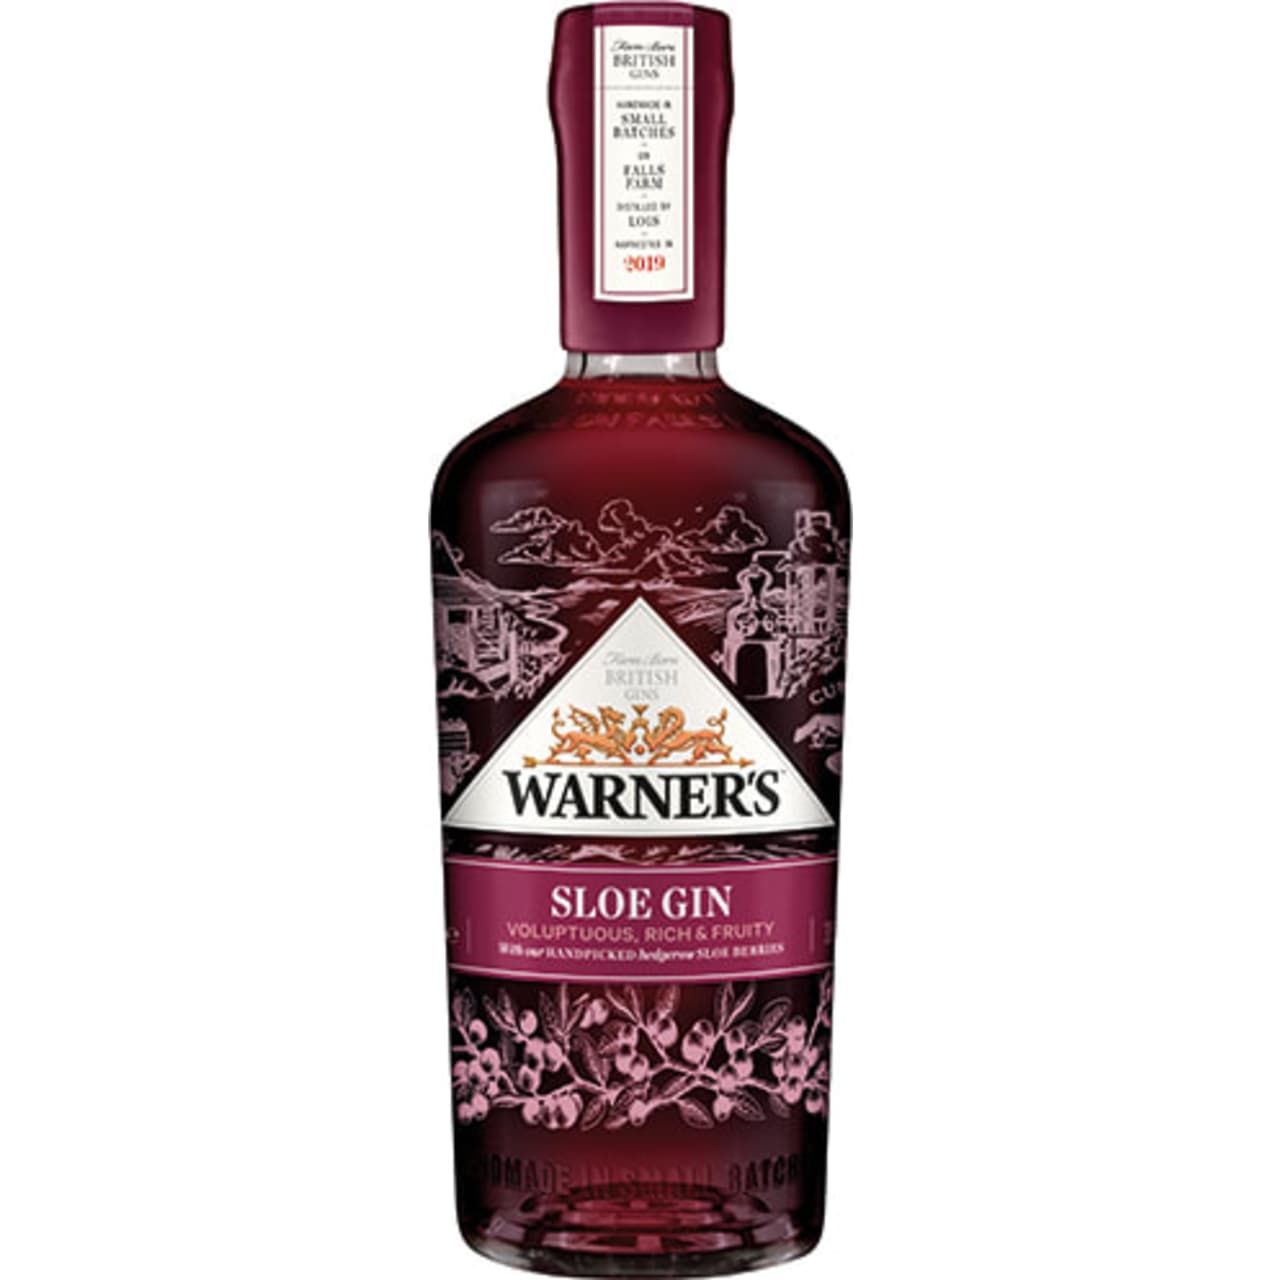 Wonderfully rich and deep in flavour. The gin and fruit come together with a velvety depth and warmth that makes you feel at one with the world!